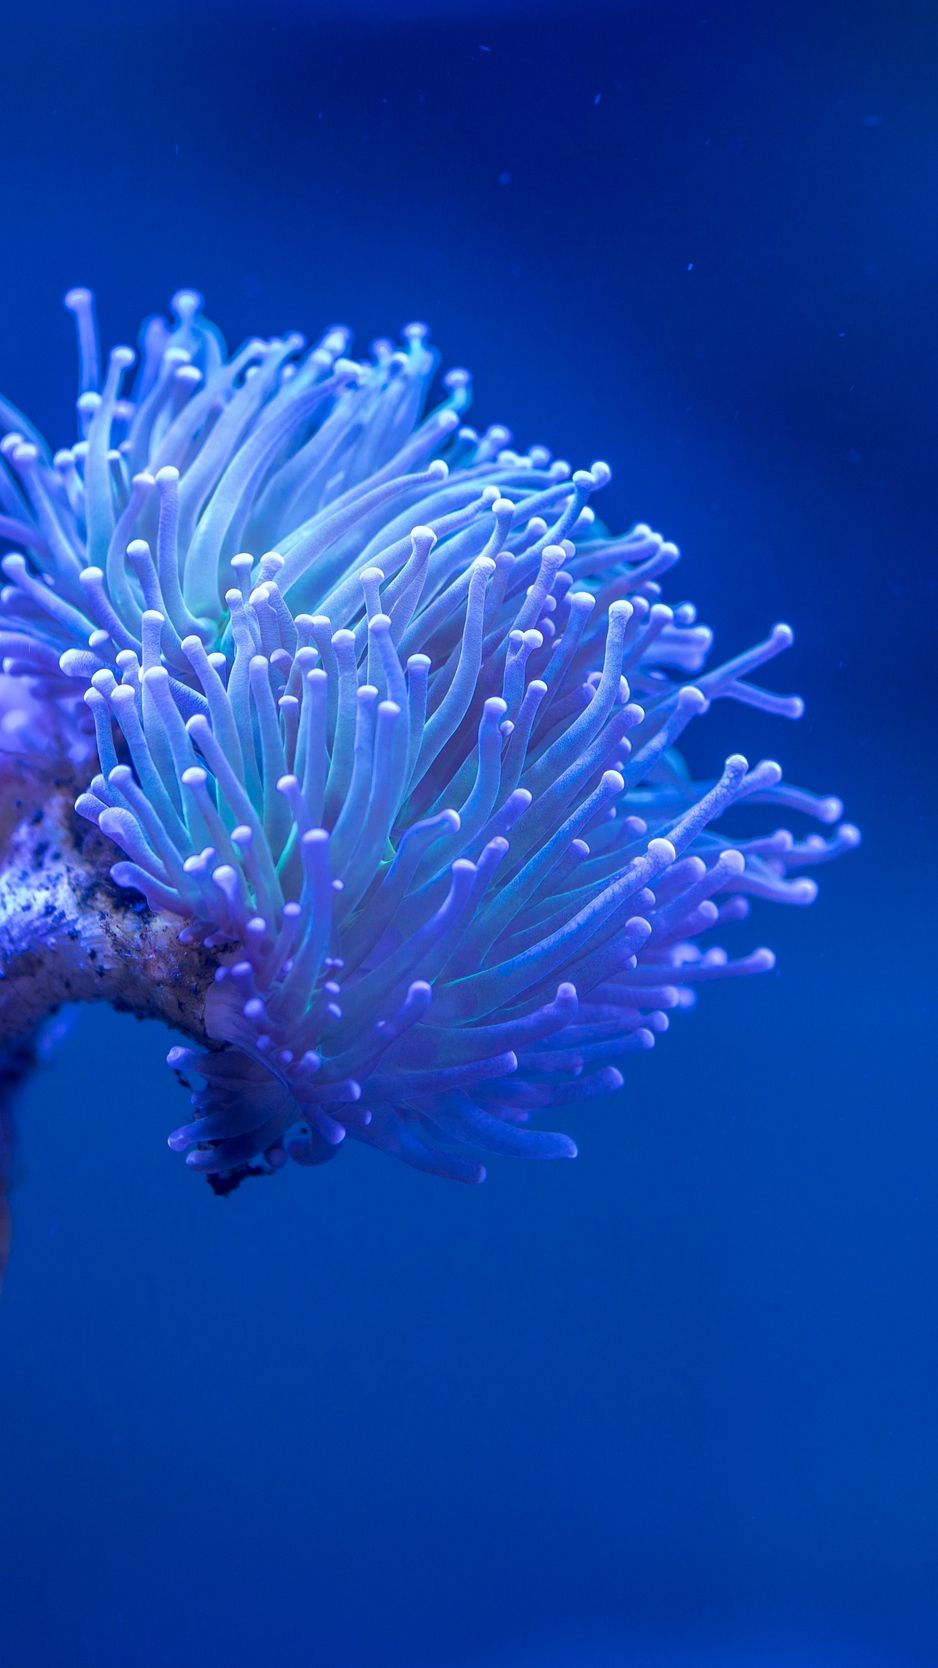 A blue and purple flower in the water - Coral